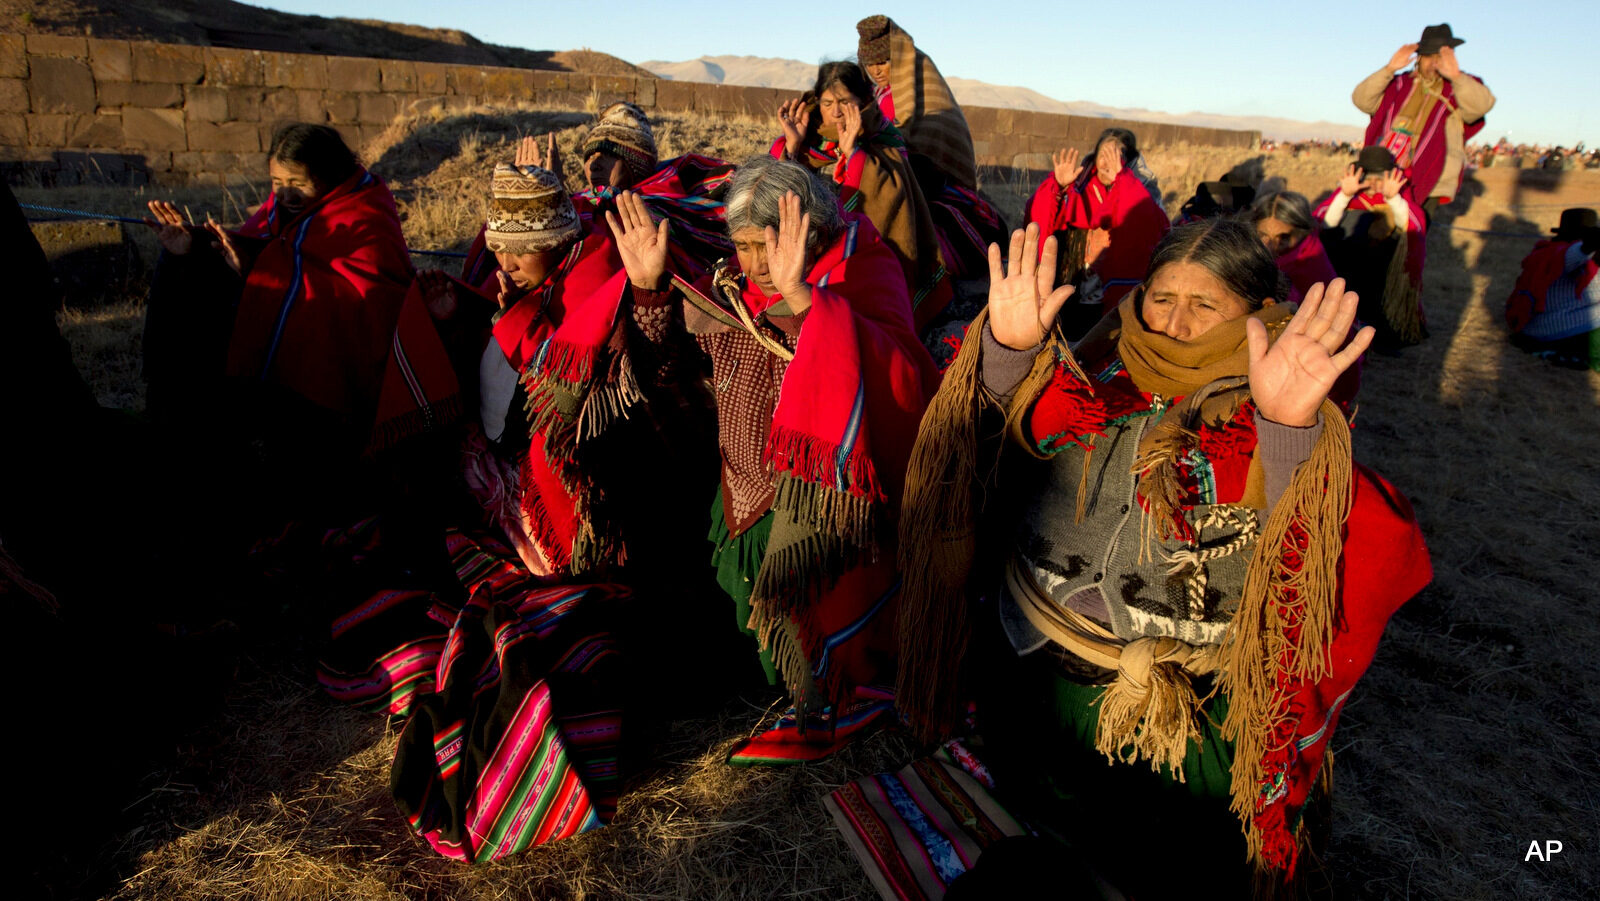 Aymara indigenous hold up their hands to receive the first rays of sunlight in a New Year's ritual in the ruins of the ancient city Tiwanaku, Bolivia, early Tuesday, June 21, 2016. Bolivia's Aymara Indians are celebrating the year 5,524 as well as the Southern Hemisphere's winter solstice, which marks the start of a new agricultural cycle.